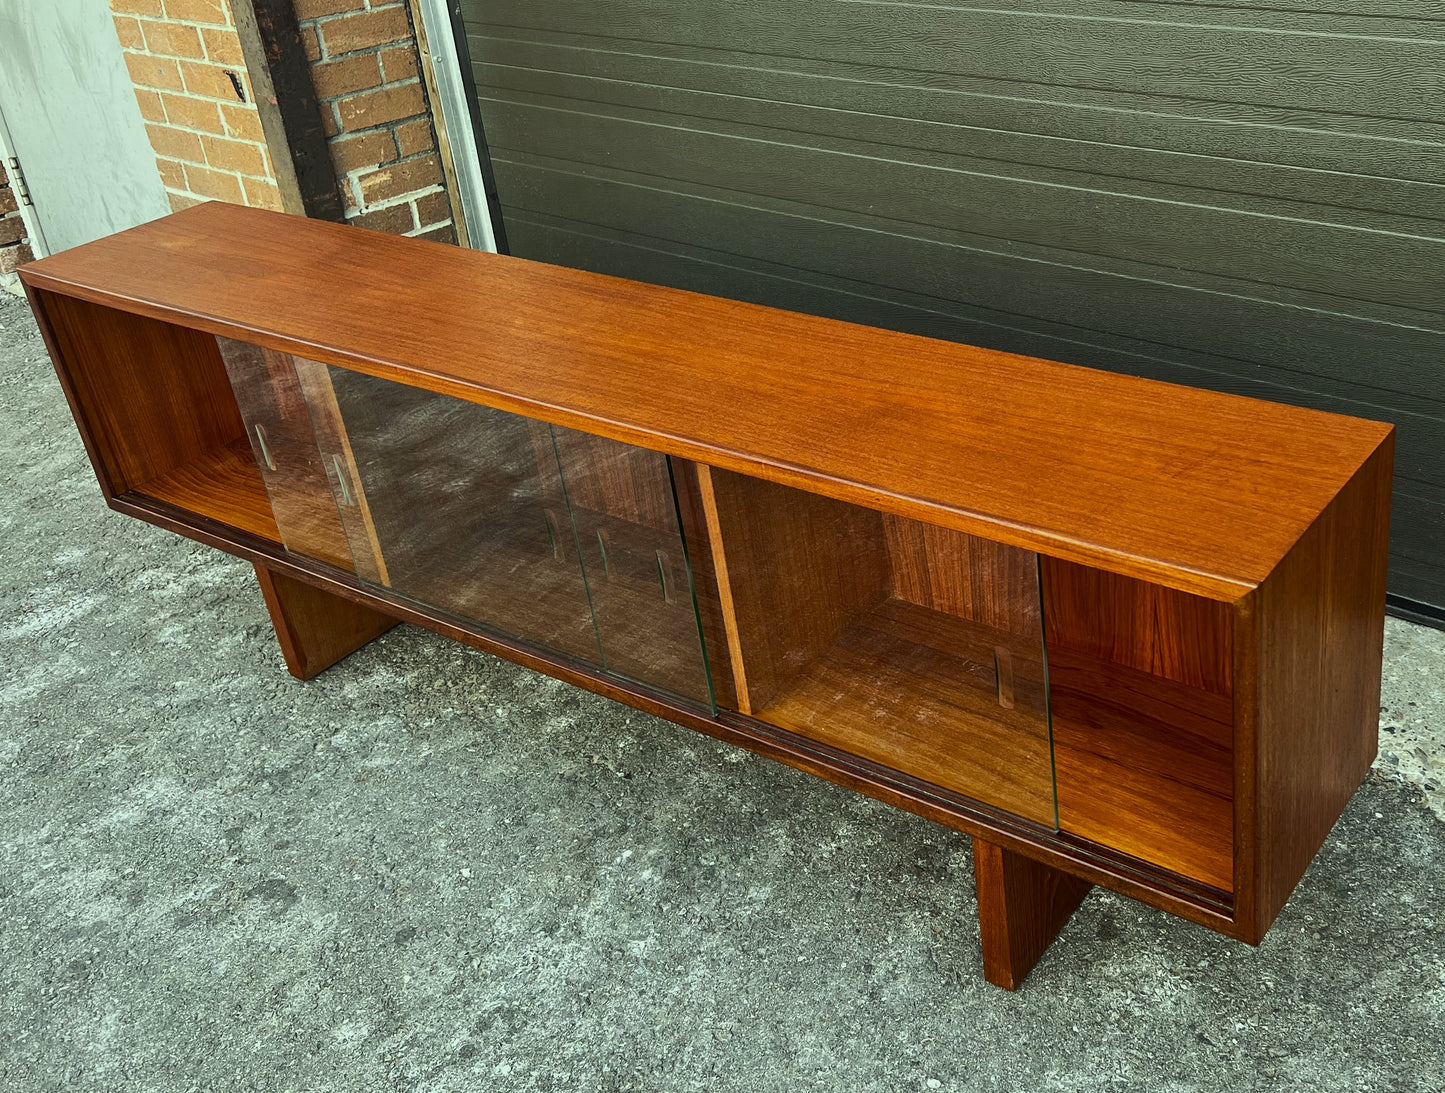 REFINISHED Mid Century Modern Teak TV Console Display 72" Low